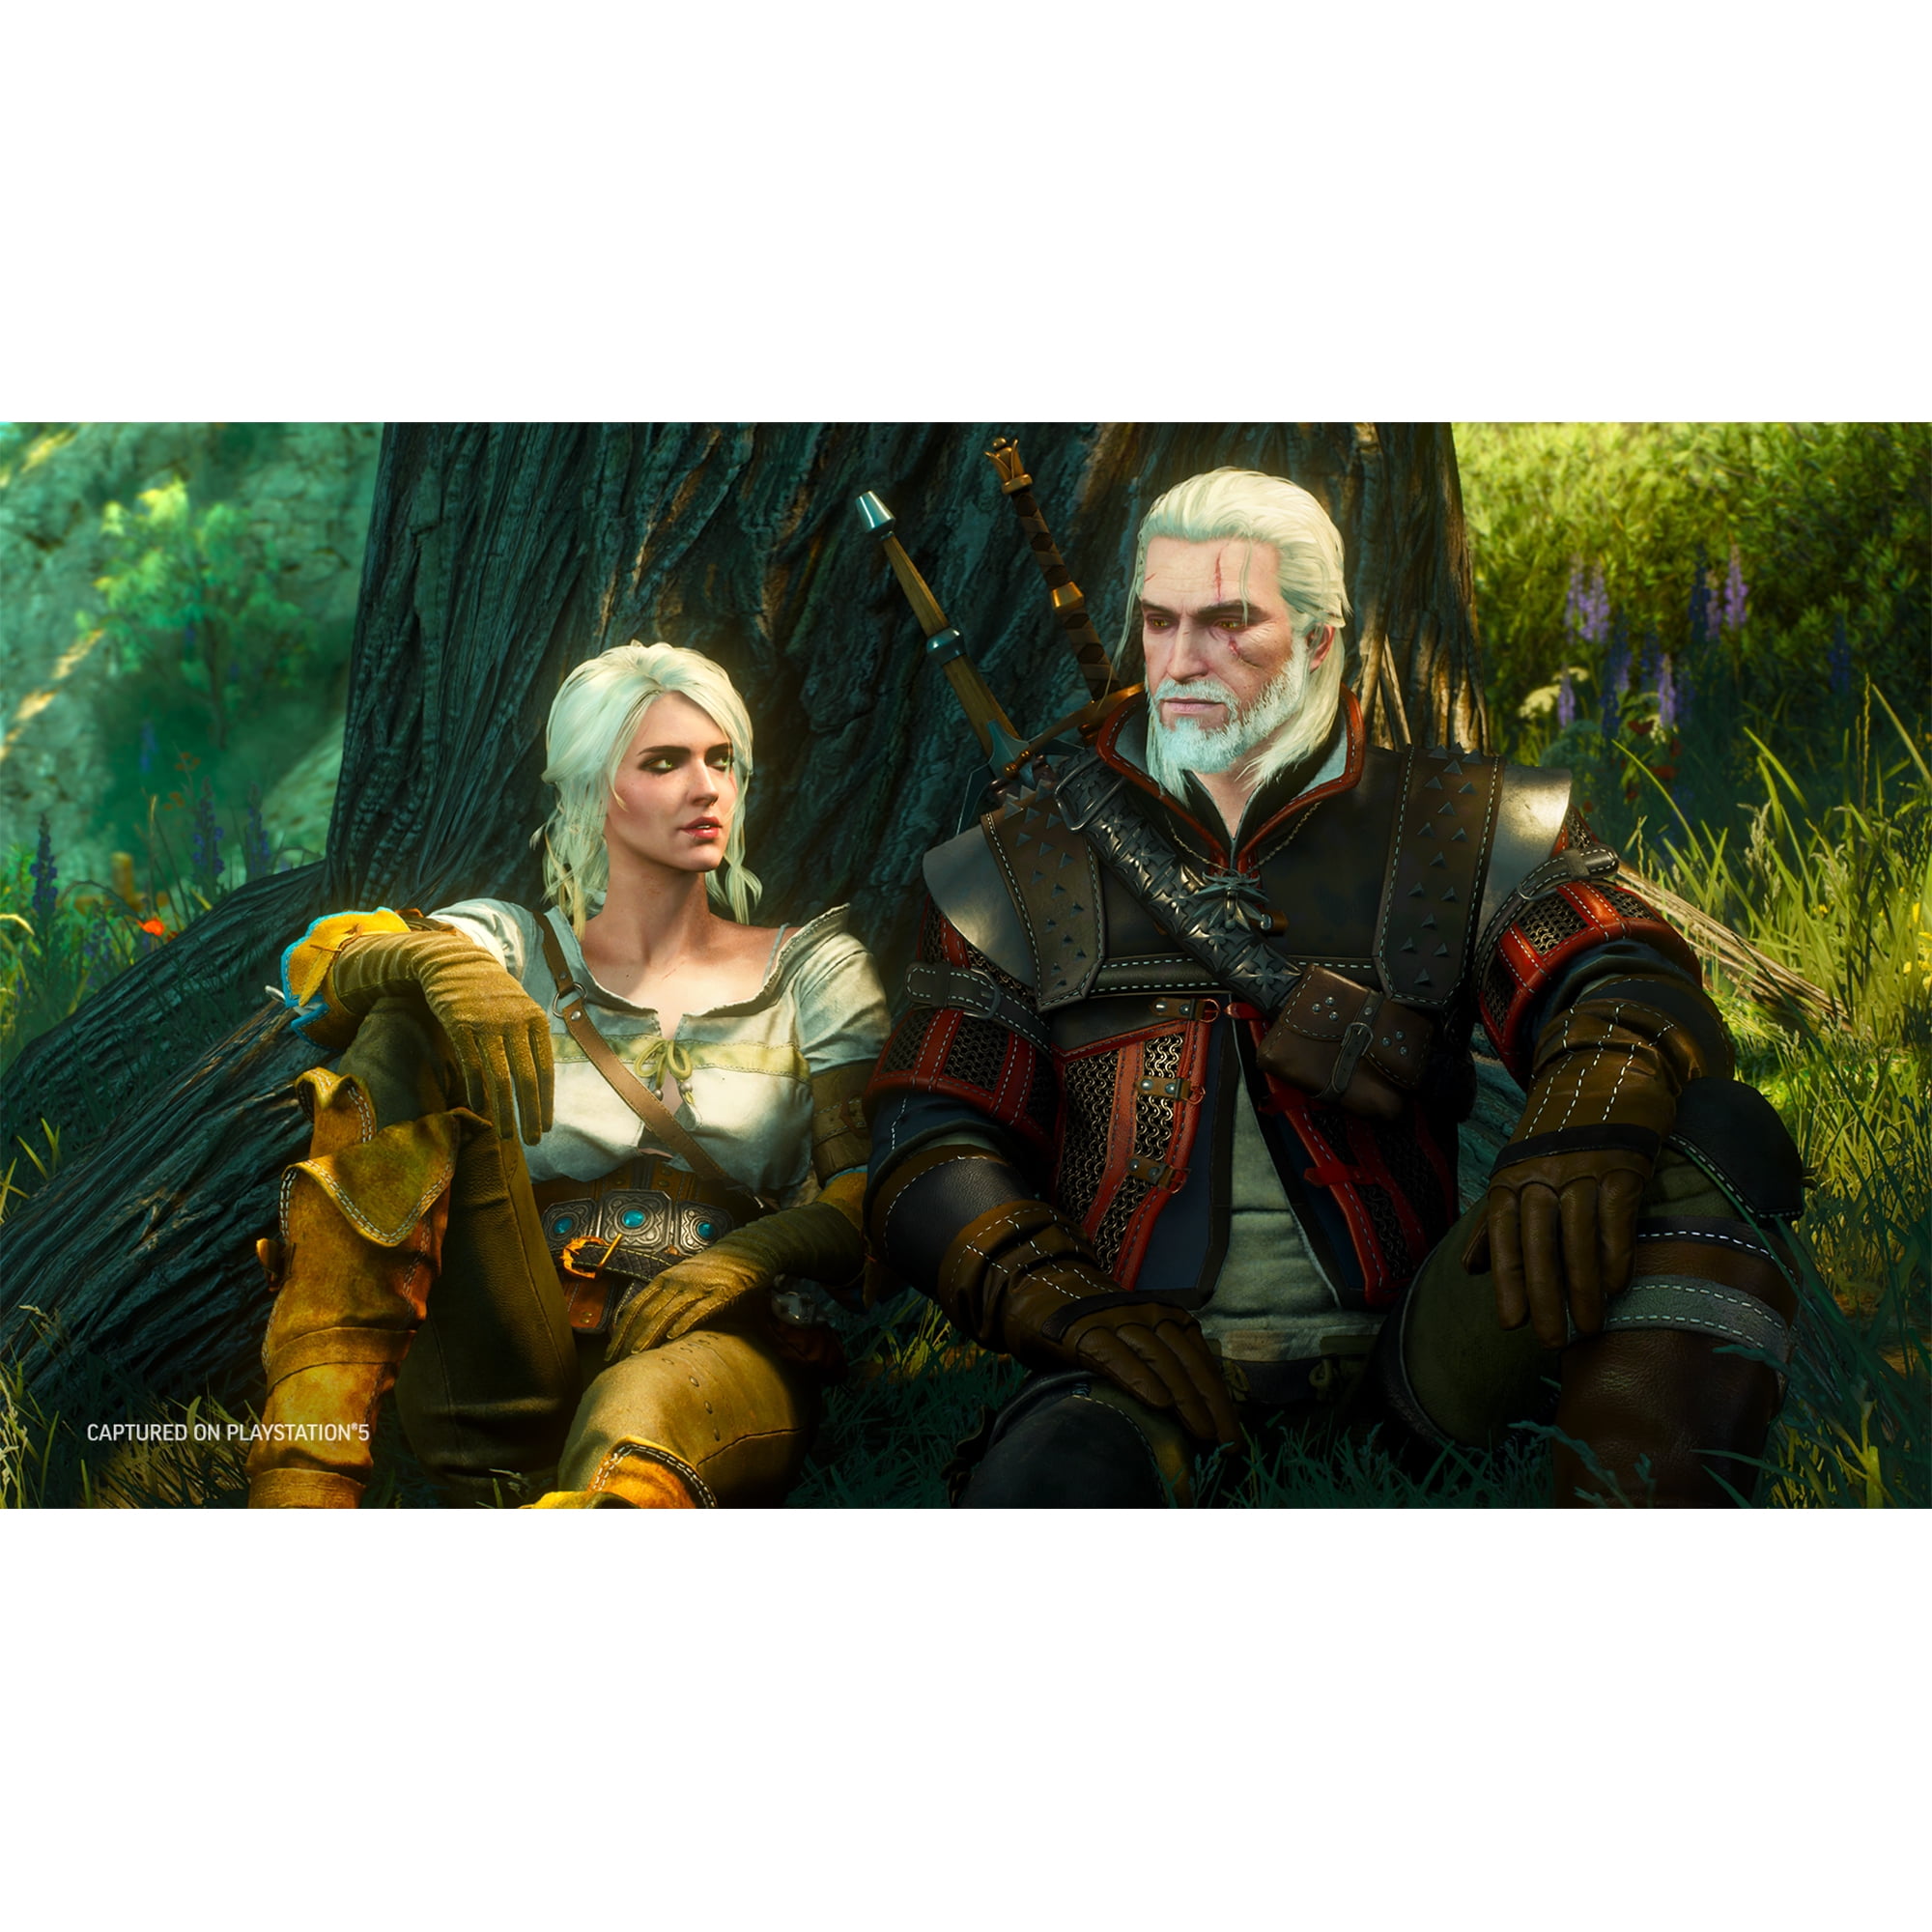 The Witcher 3: Wild Hunt - Complete Edition - PlayStation 5 